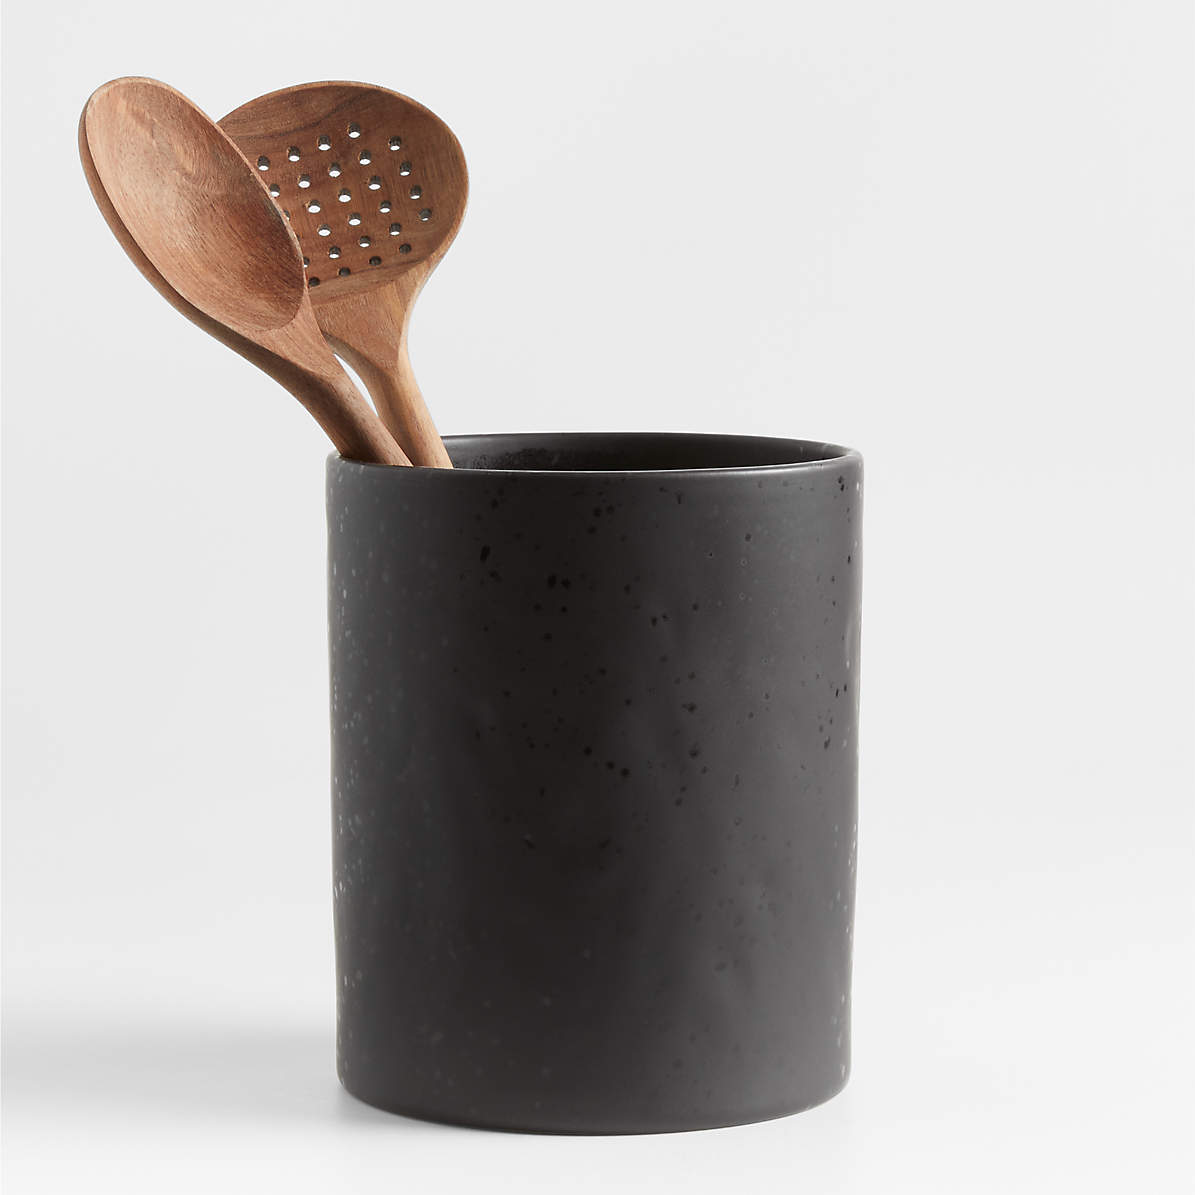 Oversized Kitchen Utensils Stand With 4 Compartments, Matte Black